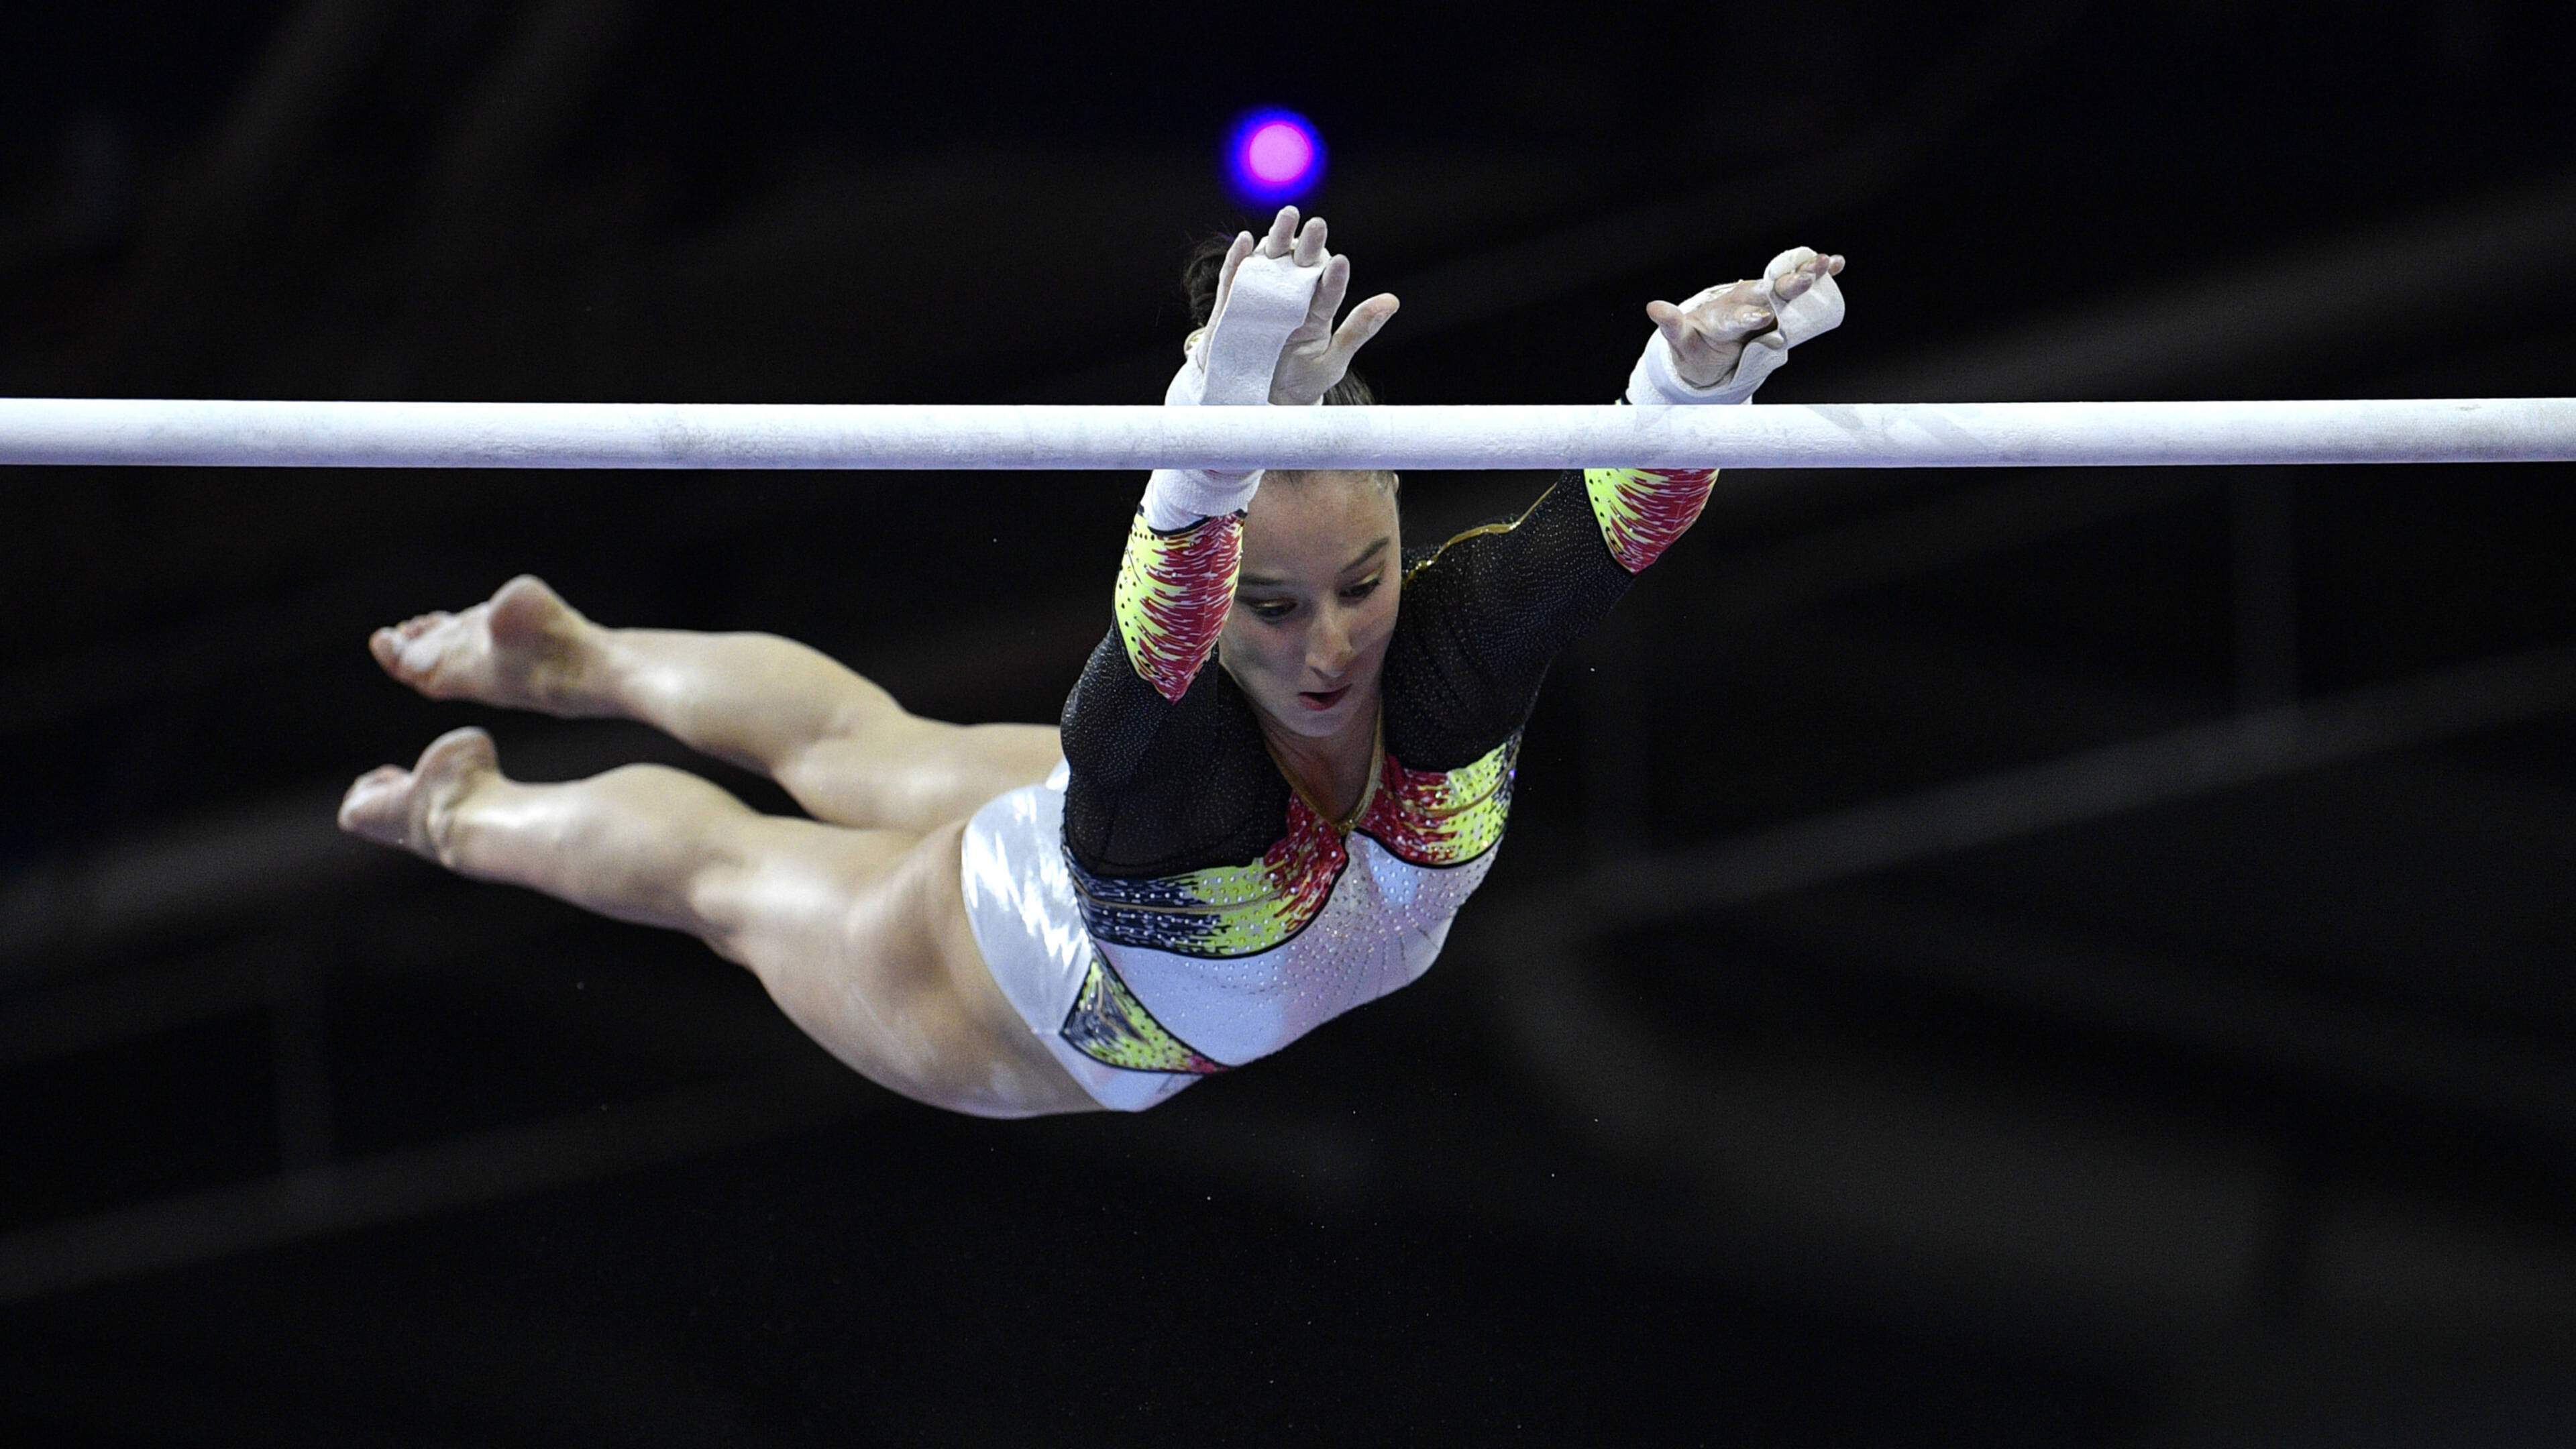 Uneven Bars: Nina Derwael, A Belgian artistic gymnast, 2020 Olympic champion, A two-time World champion. 3840x2160 4K Background.